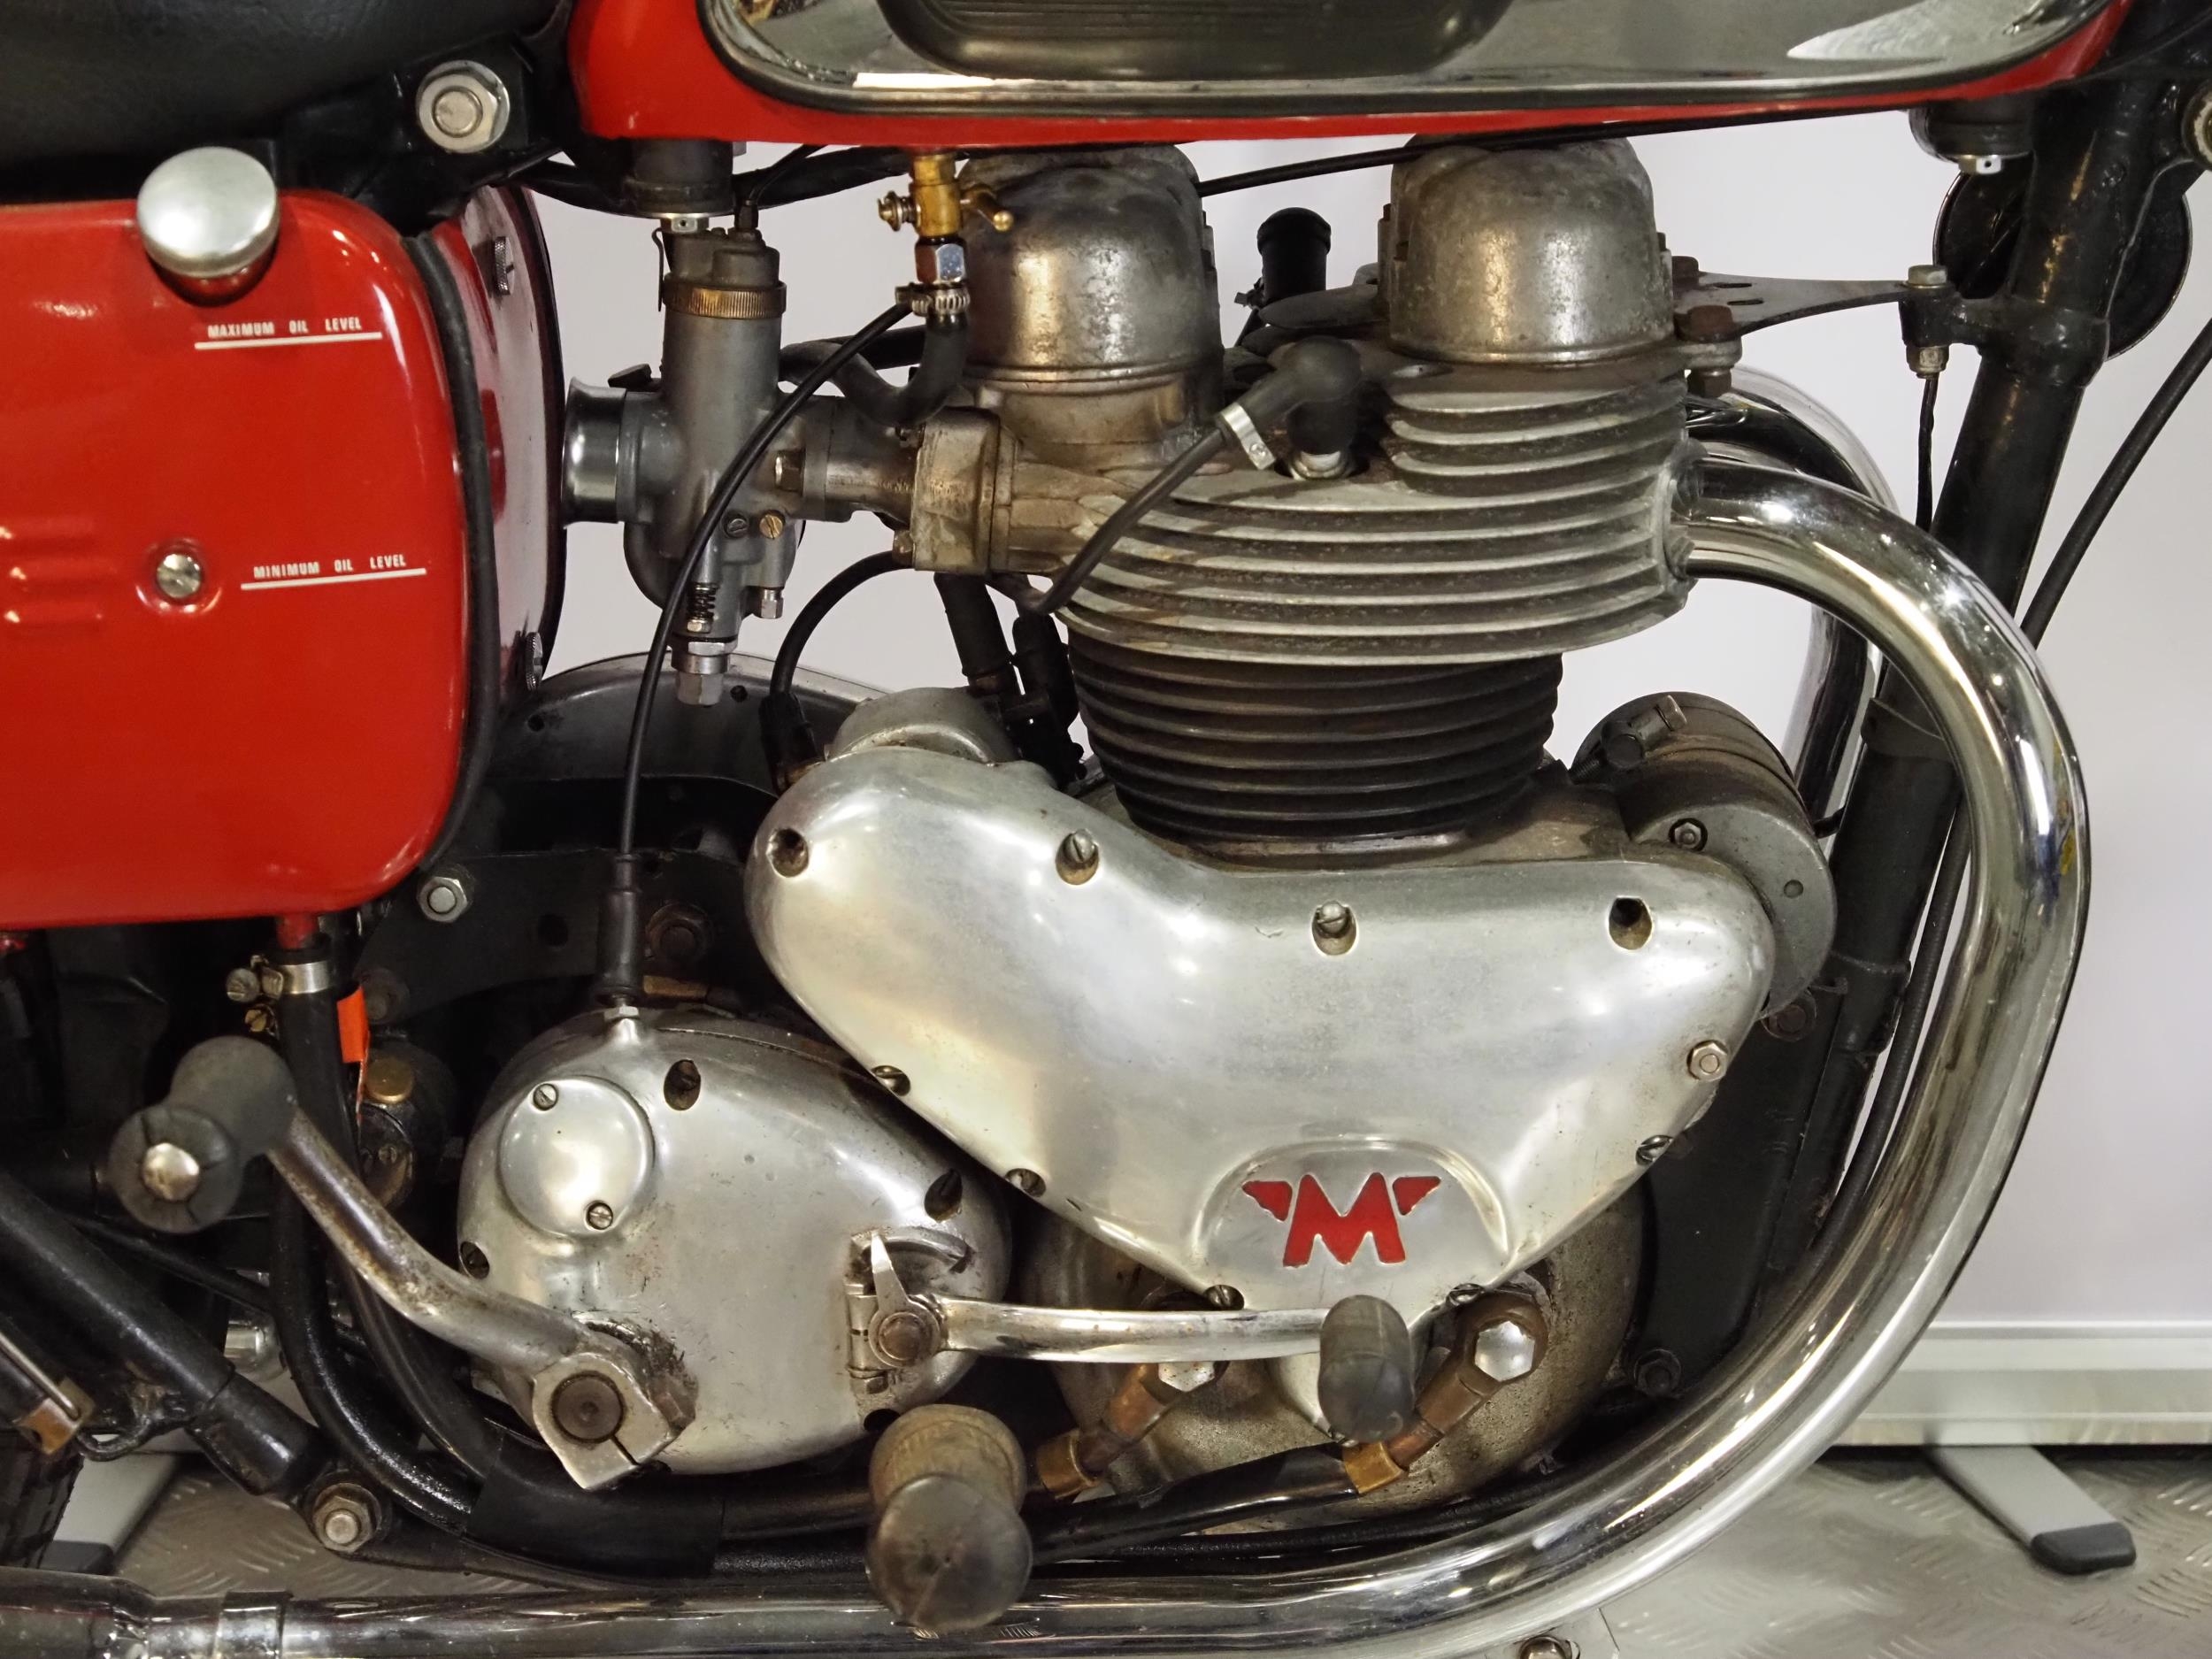 Matchless G11 motorcycle. 1958. 600cc. Frame No. A65717 Engine No. 573005071 Runs and rides. - Image 4 of 6